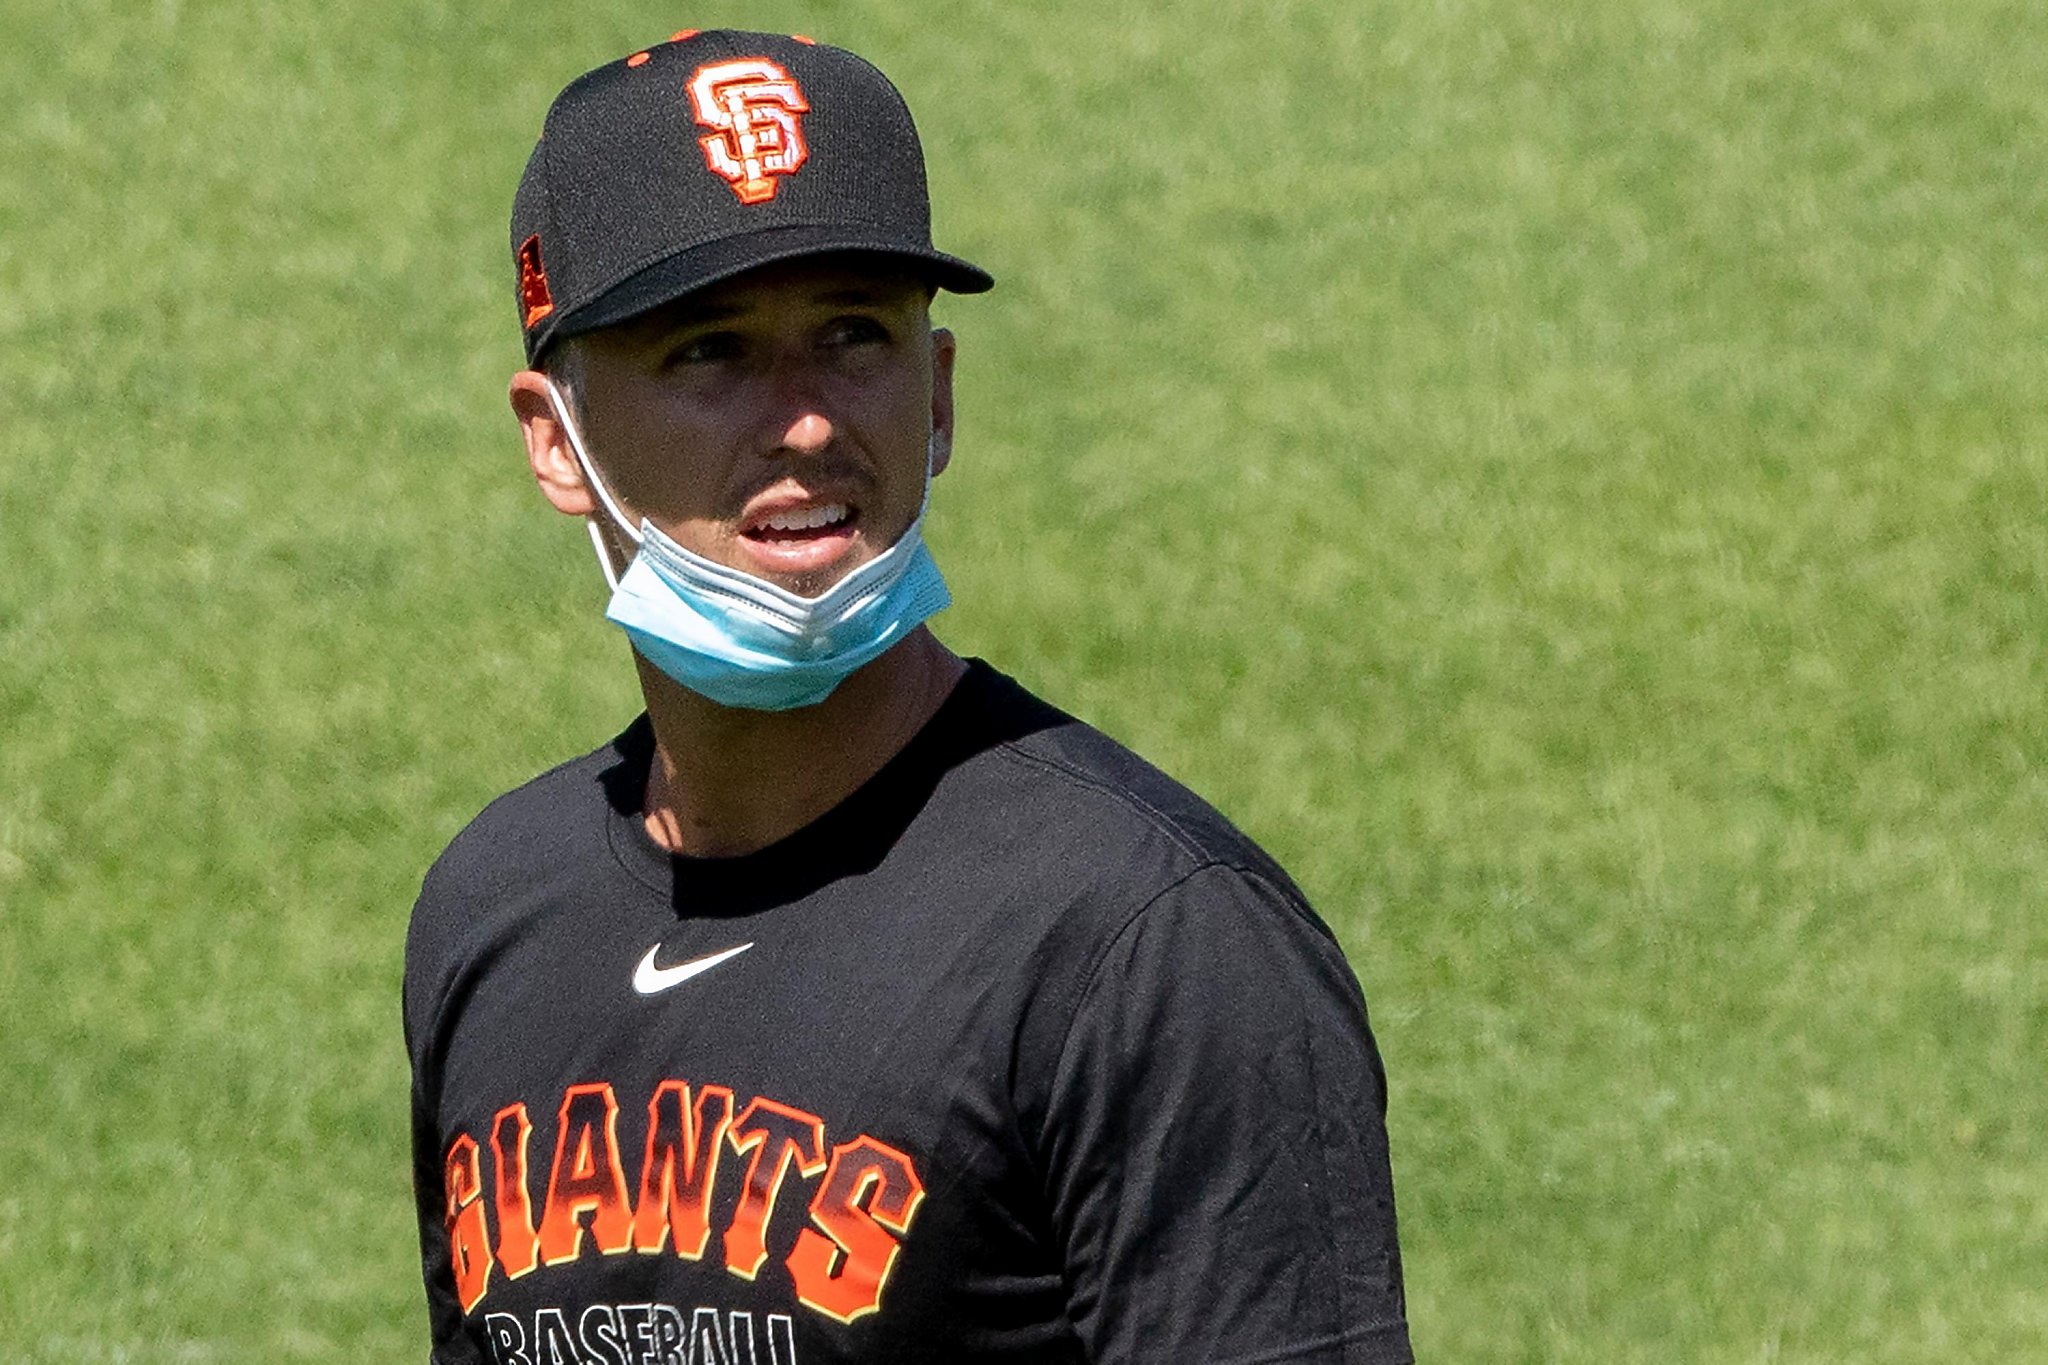 Buster Posey opts out of 2020 season after adoption of premature